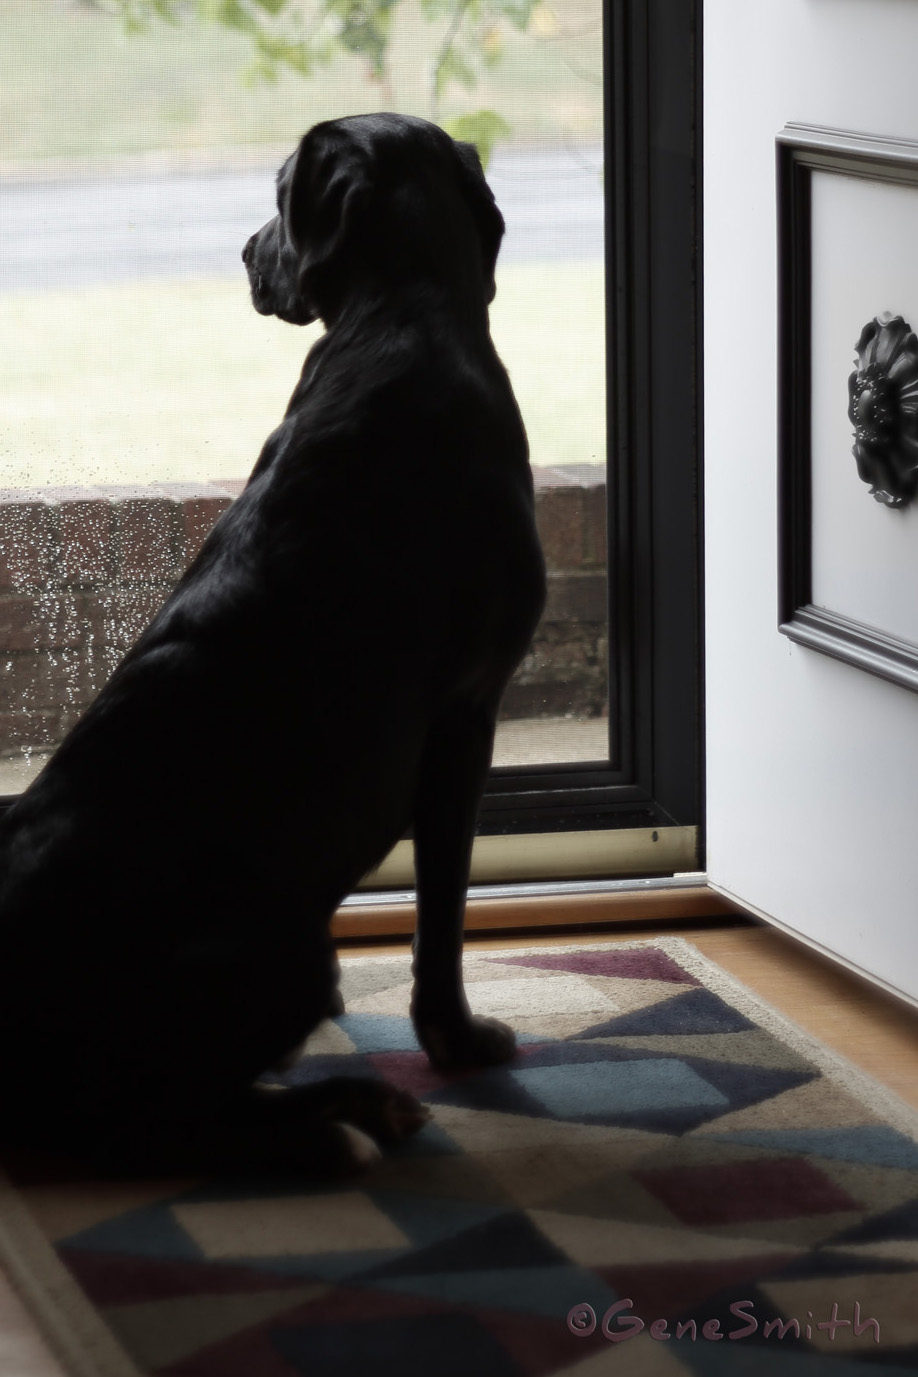 Here's my Bernie. He is captivated by the Boxer 'Stella' across the street. I made this photo last week after being inspired by Marc Levoy's lectures on Digital Photography from Stanford University. 